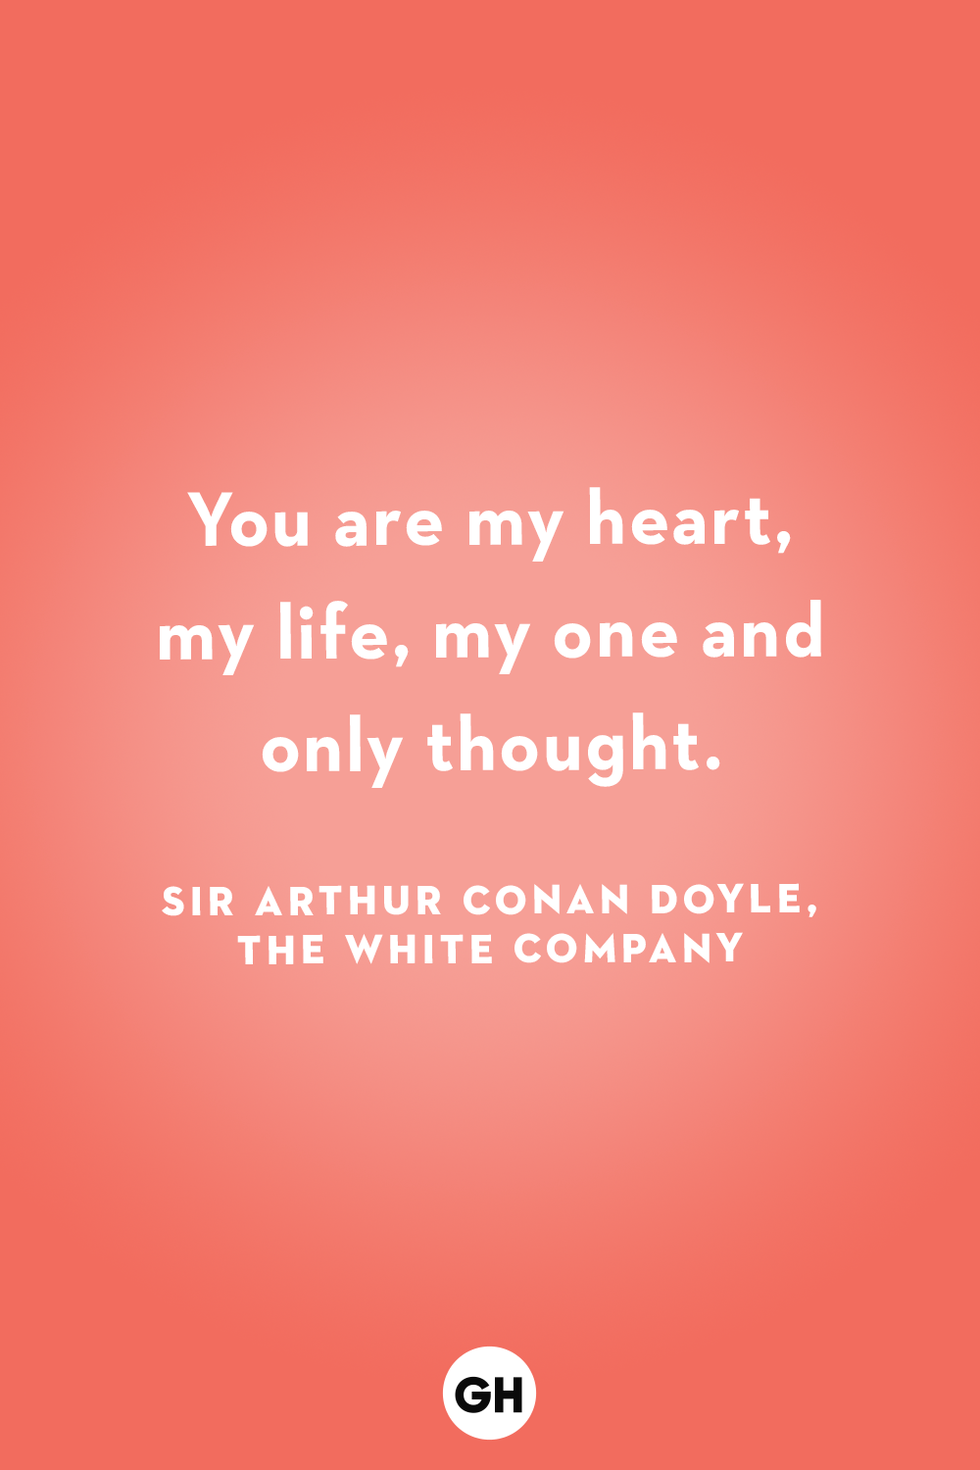 128 Best I Love You Quotes: Romantic Sayings for Him or Her